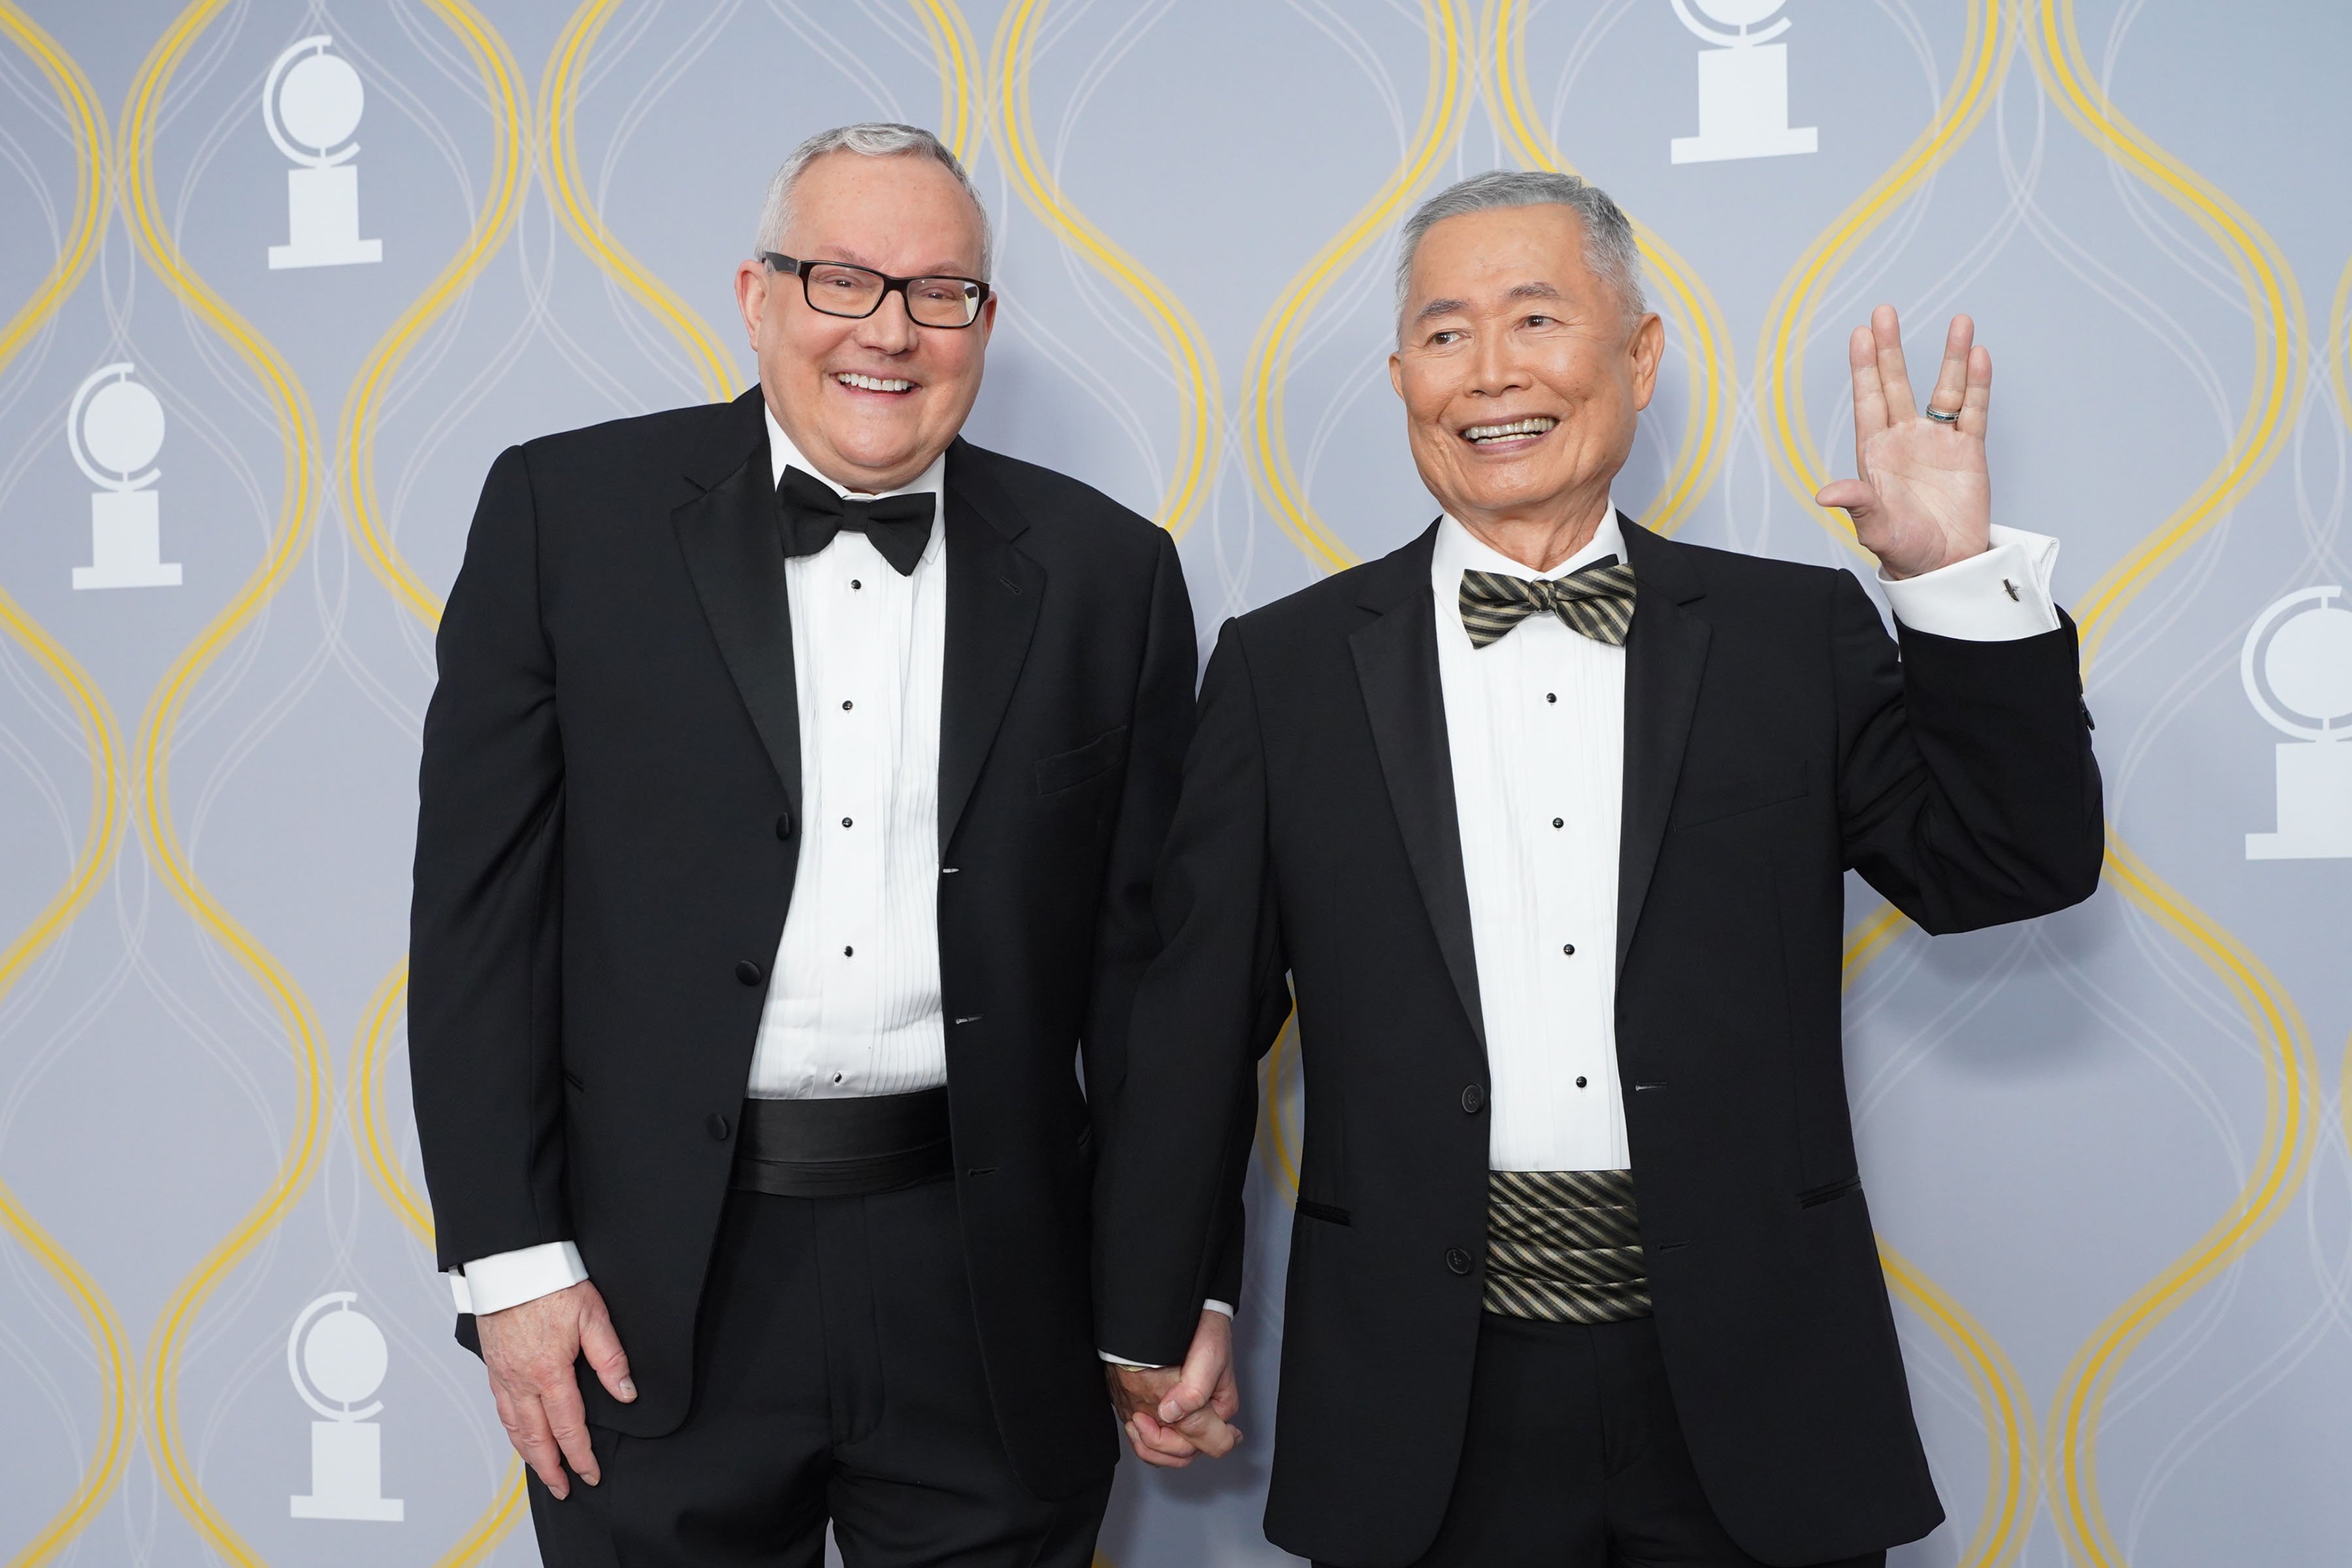 Brad Altman and George Takei at the 75th Annual Tony Awards in New York on June 12, 2022 | Source: Getty Images